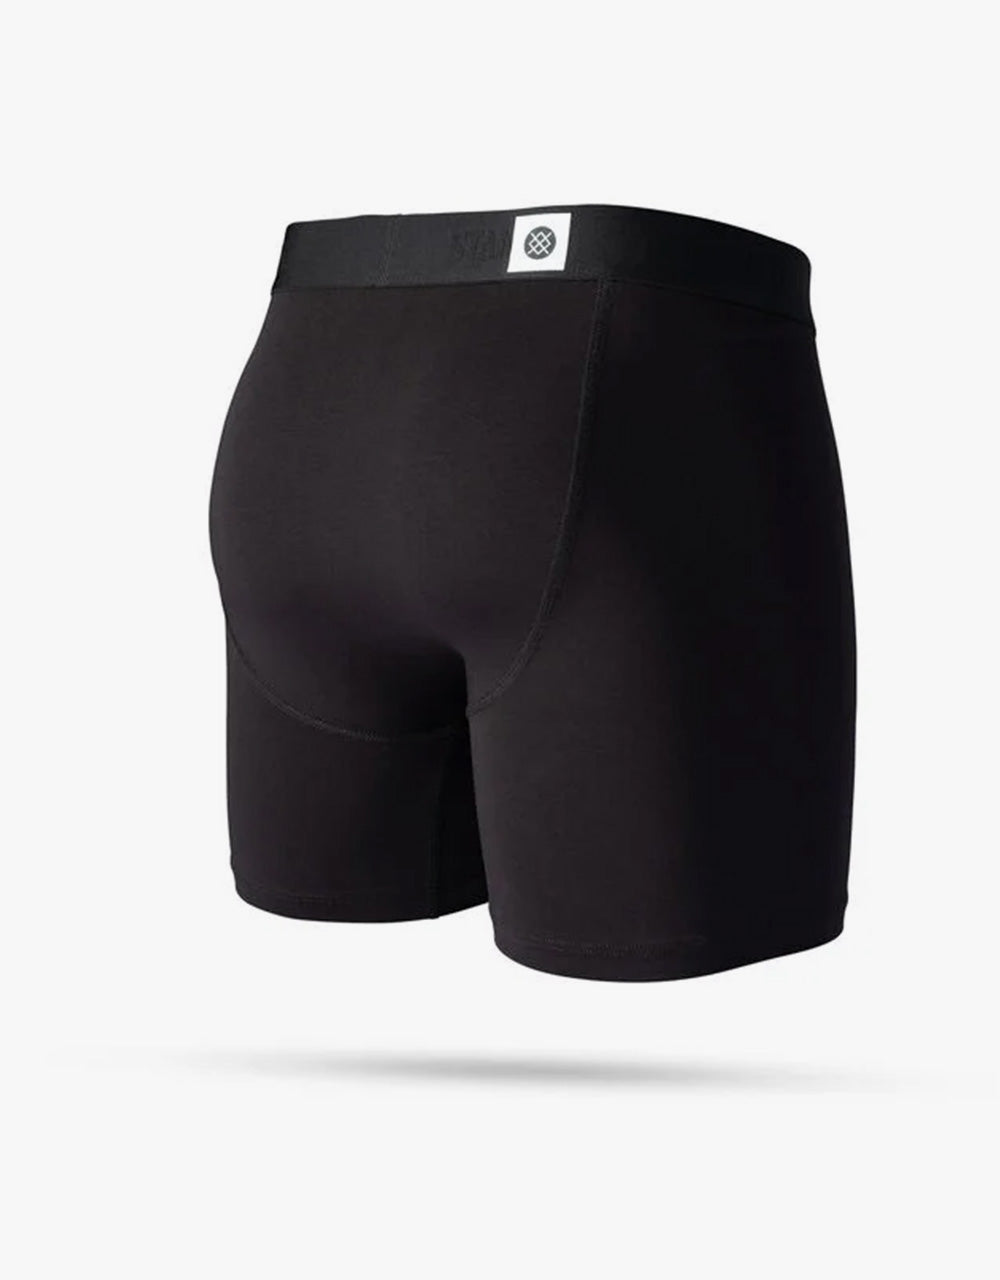 Stance Standard 6Inch Boxers - Black